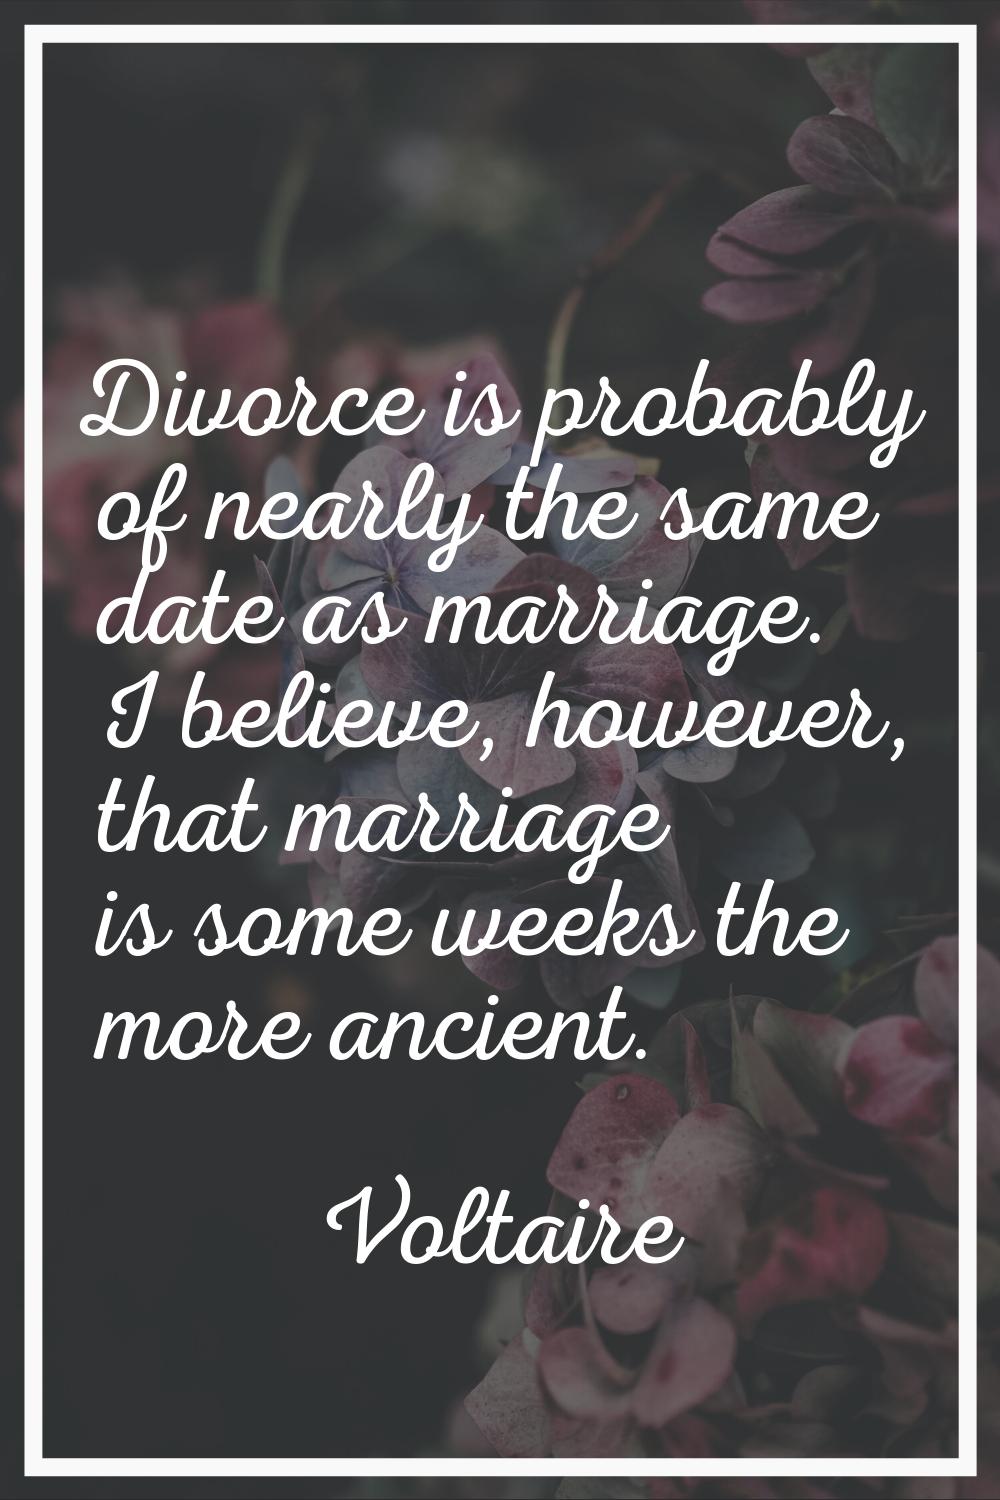 Divorce is probably of nearly the same date as marriage. I believe, however, that marriage is some 